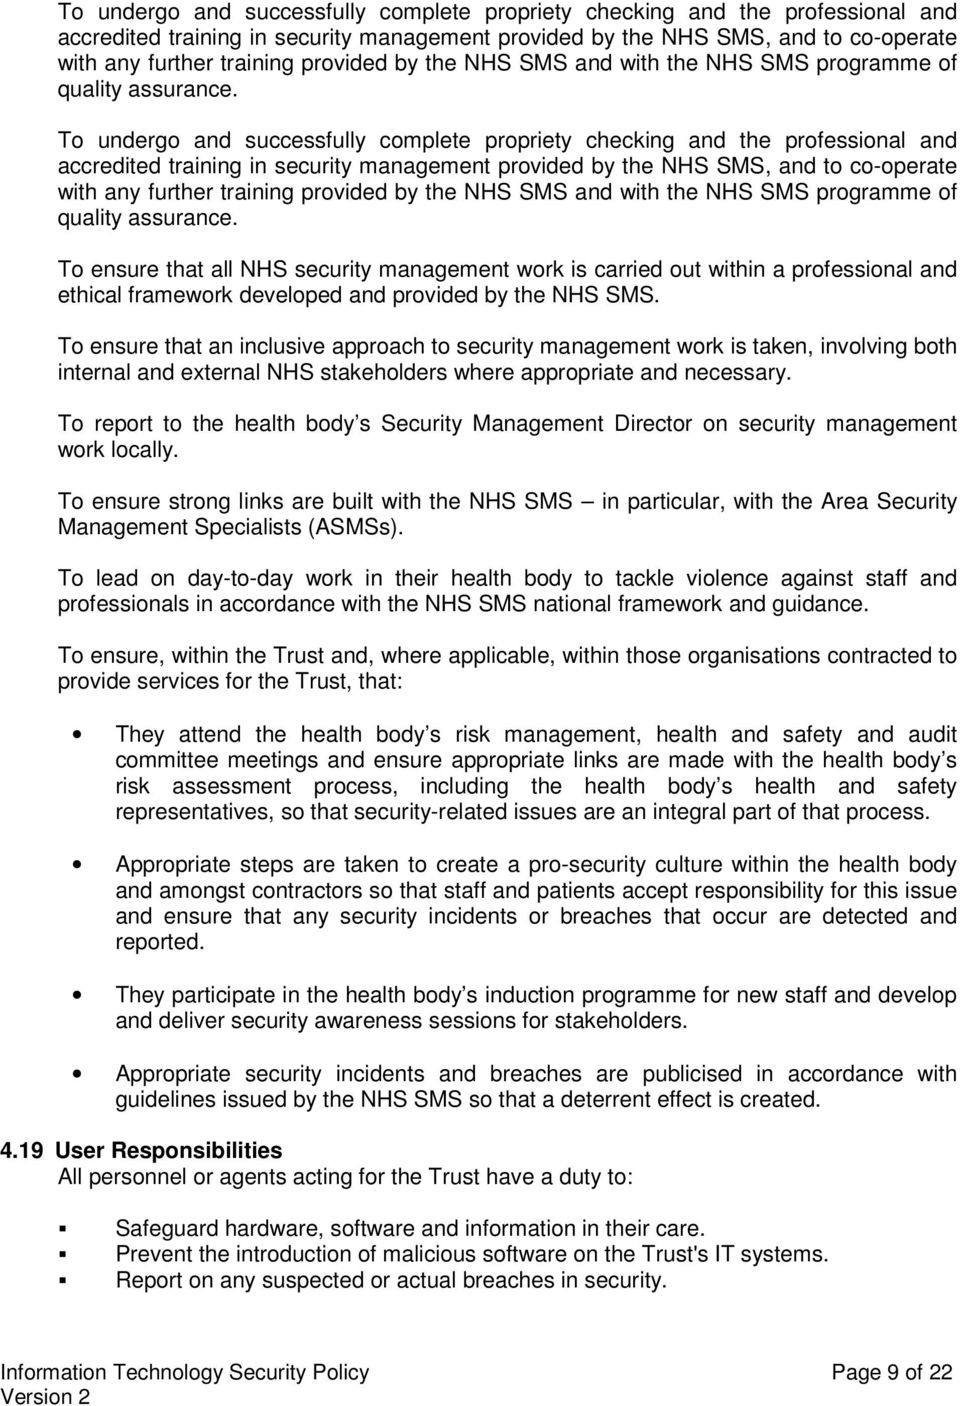 To ensure that all NHS security management work is carried out within a professional and ethical framework developed and provided by the NHS SMS.